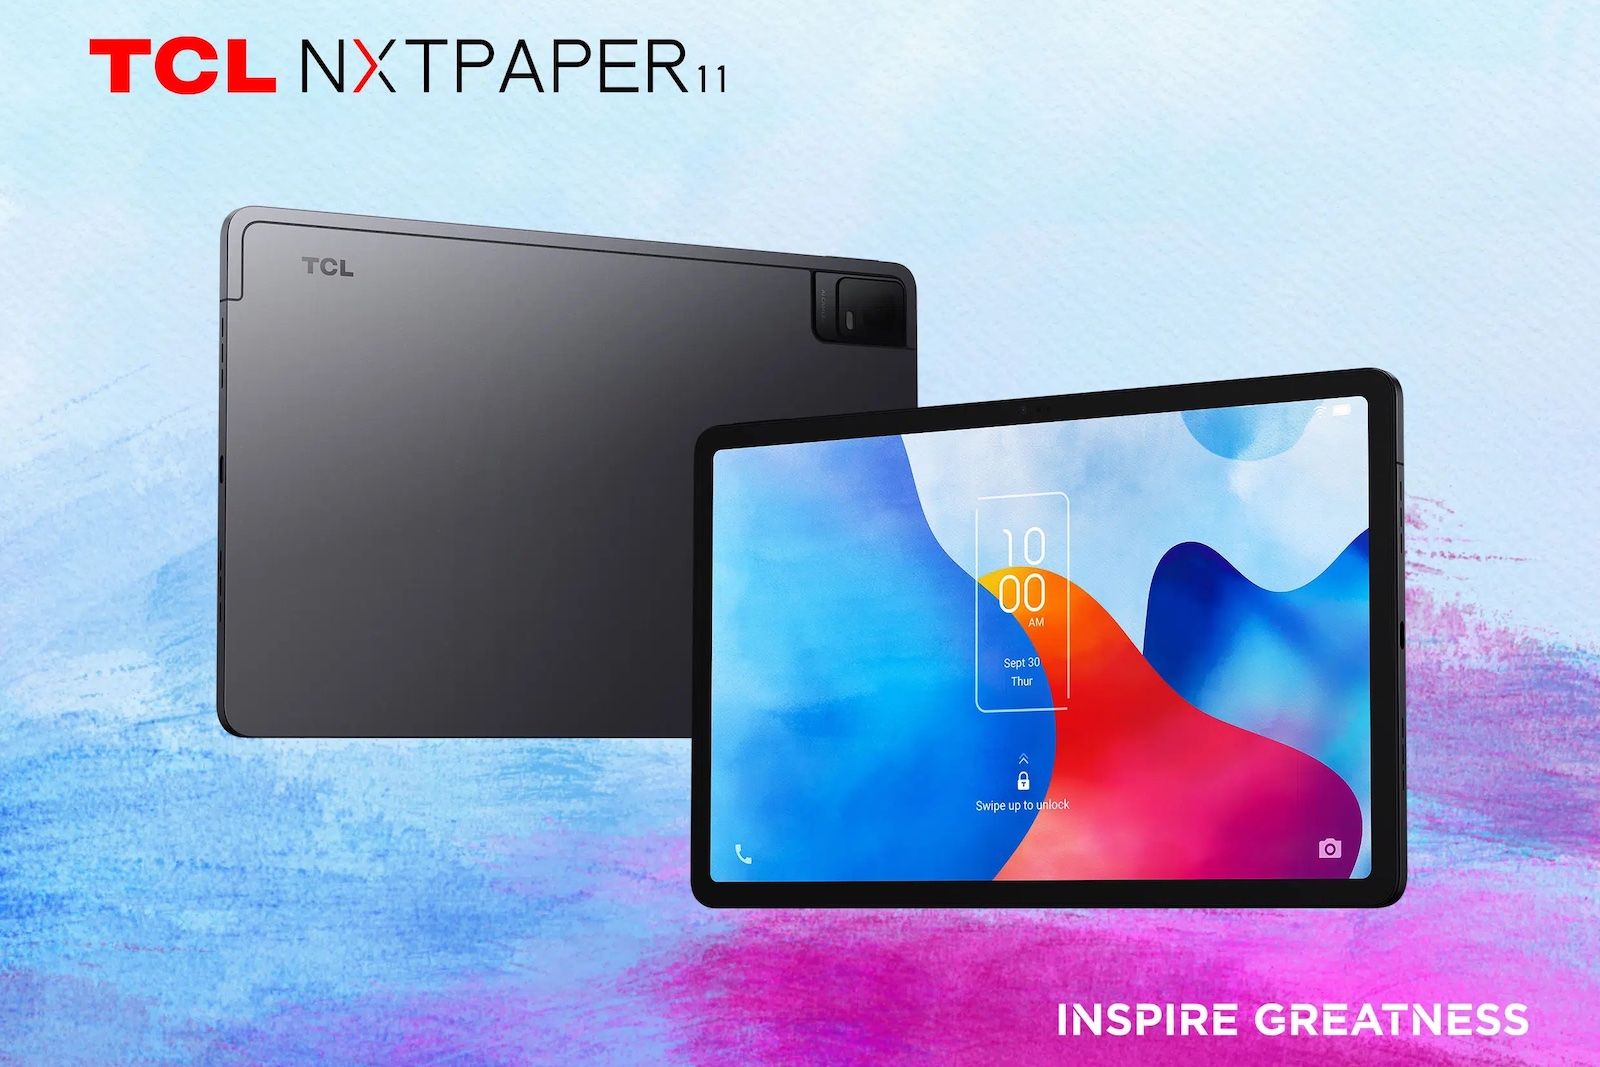 TCL NXTPAPER 11, Full-color Electronic Paper-like Display